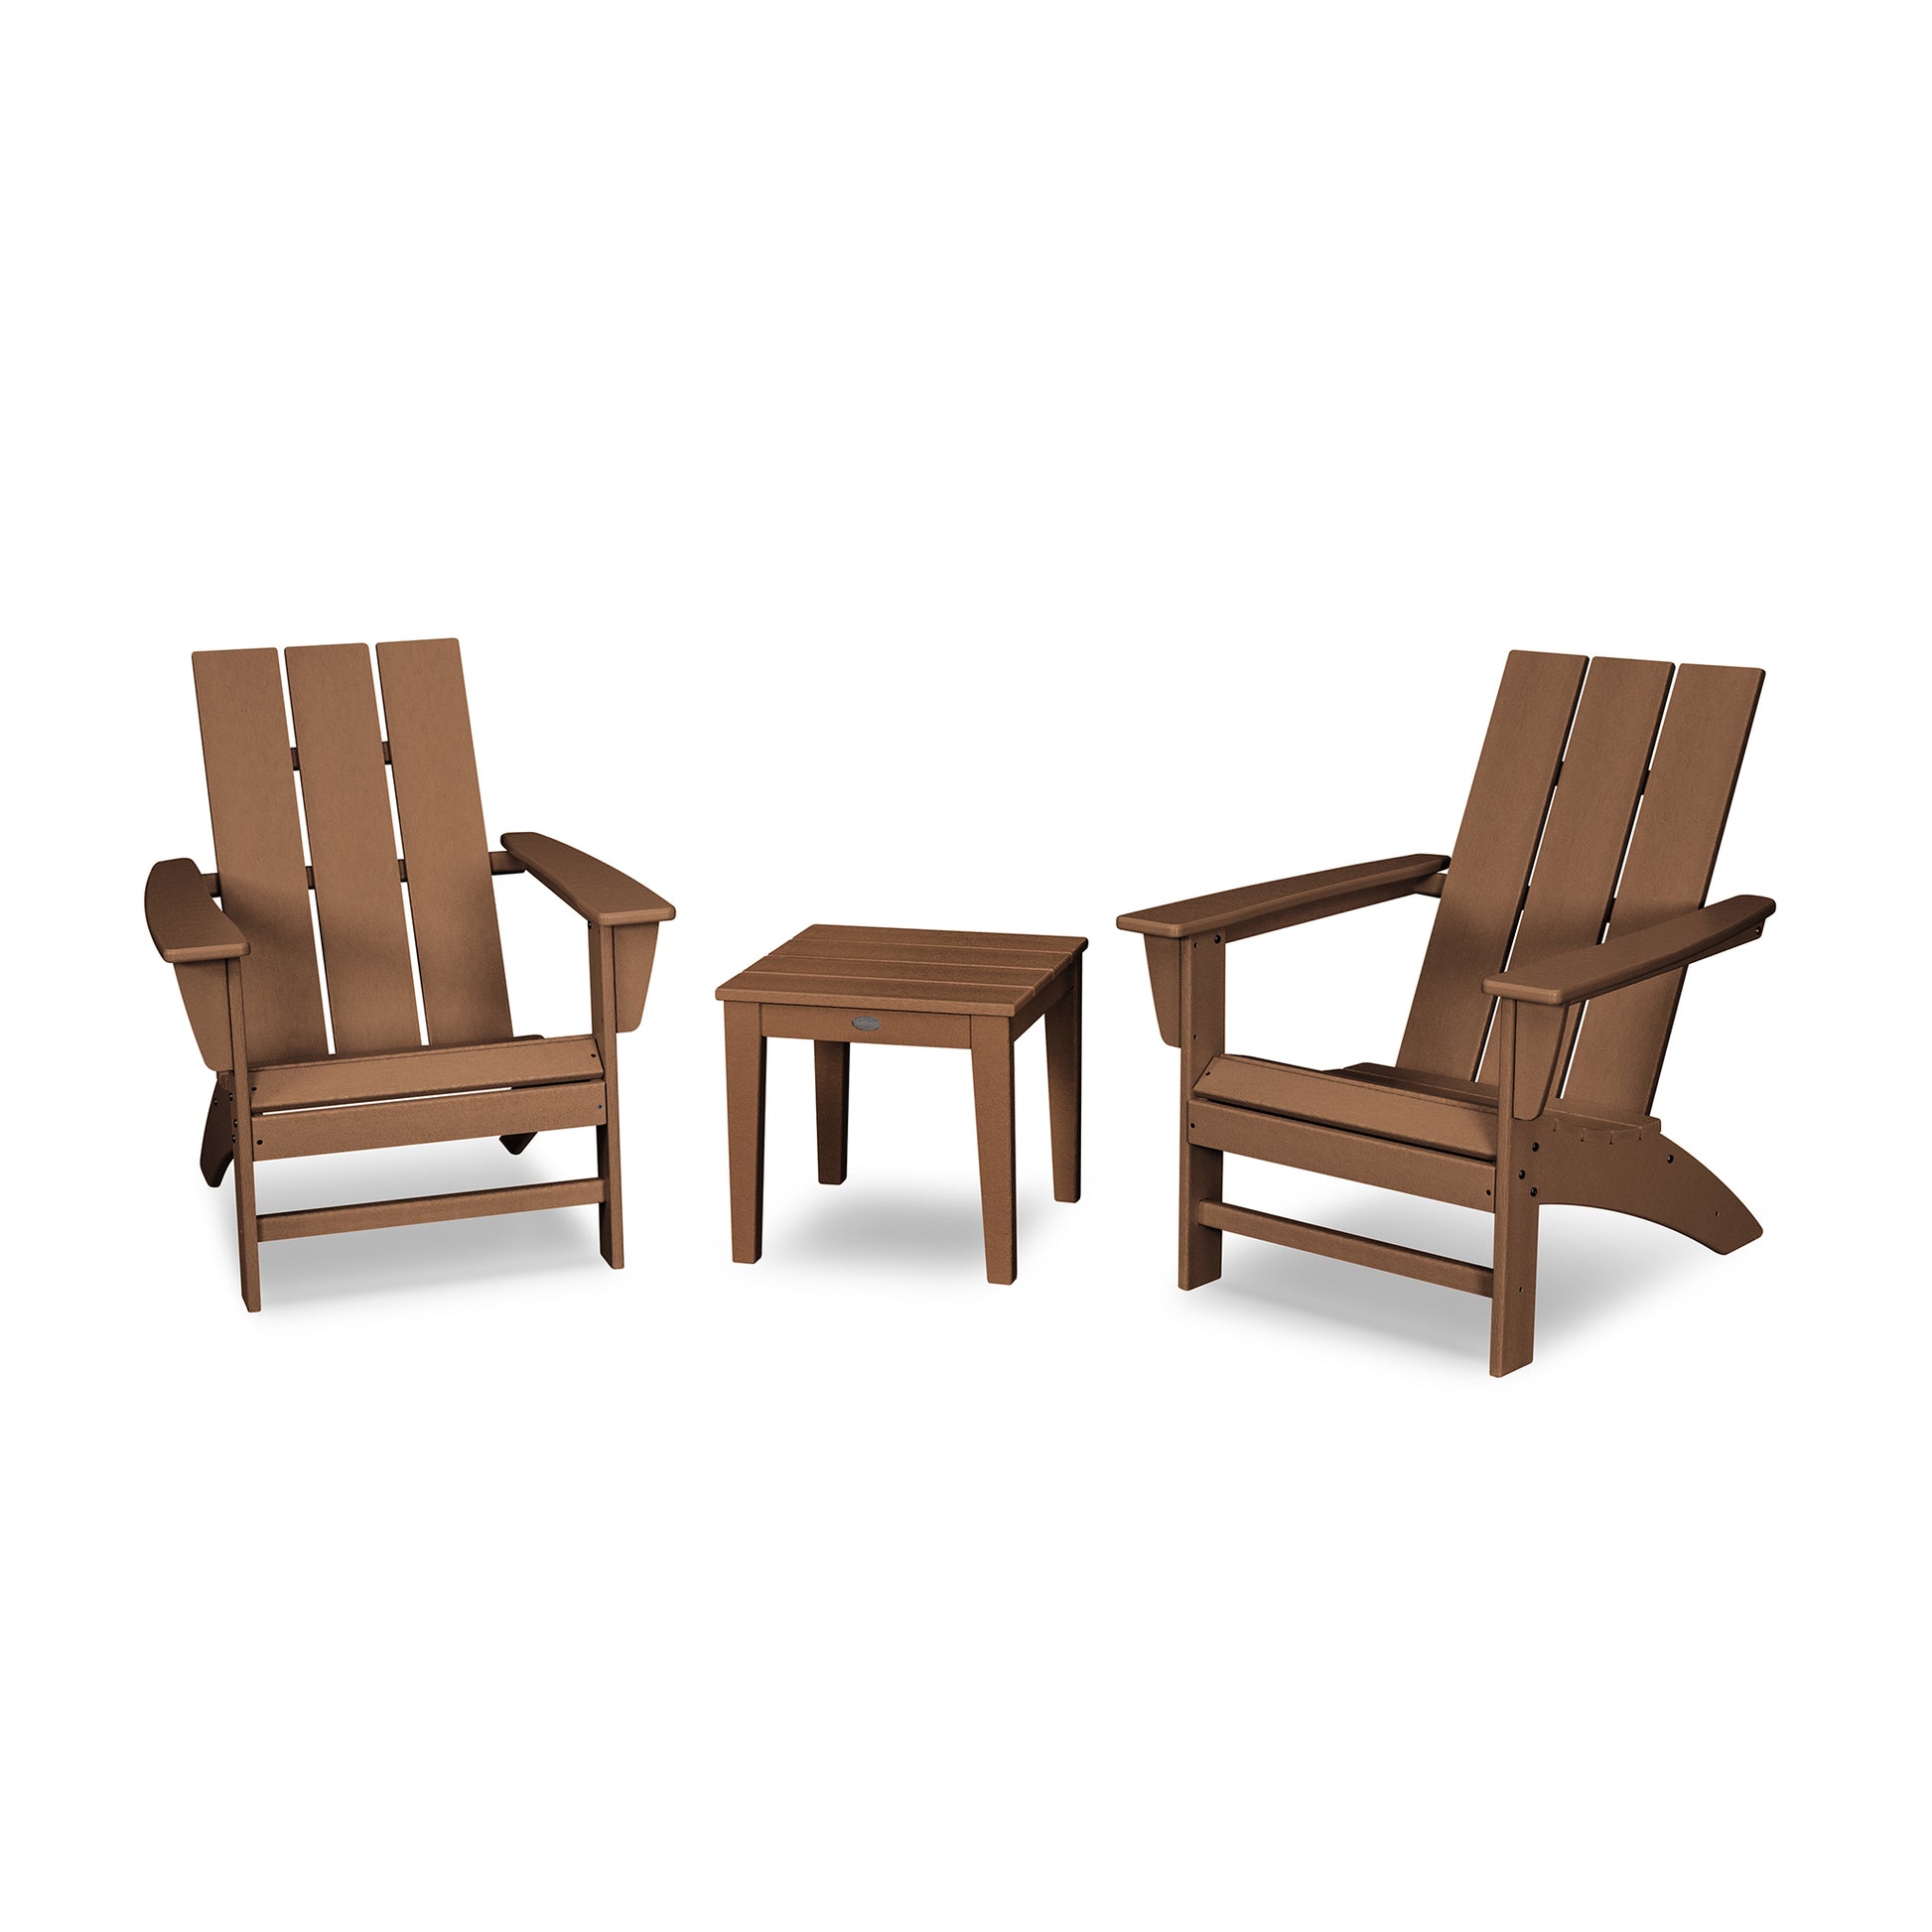 Two brown POLYWOOD Modern Adirondack chairs with a matching small square table, all crafted from durable POLYWOOD® lumber, set against a plain white background. The furniture displays a simple, sturdy design.